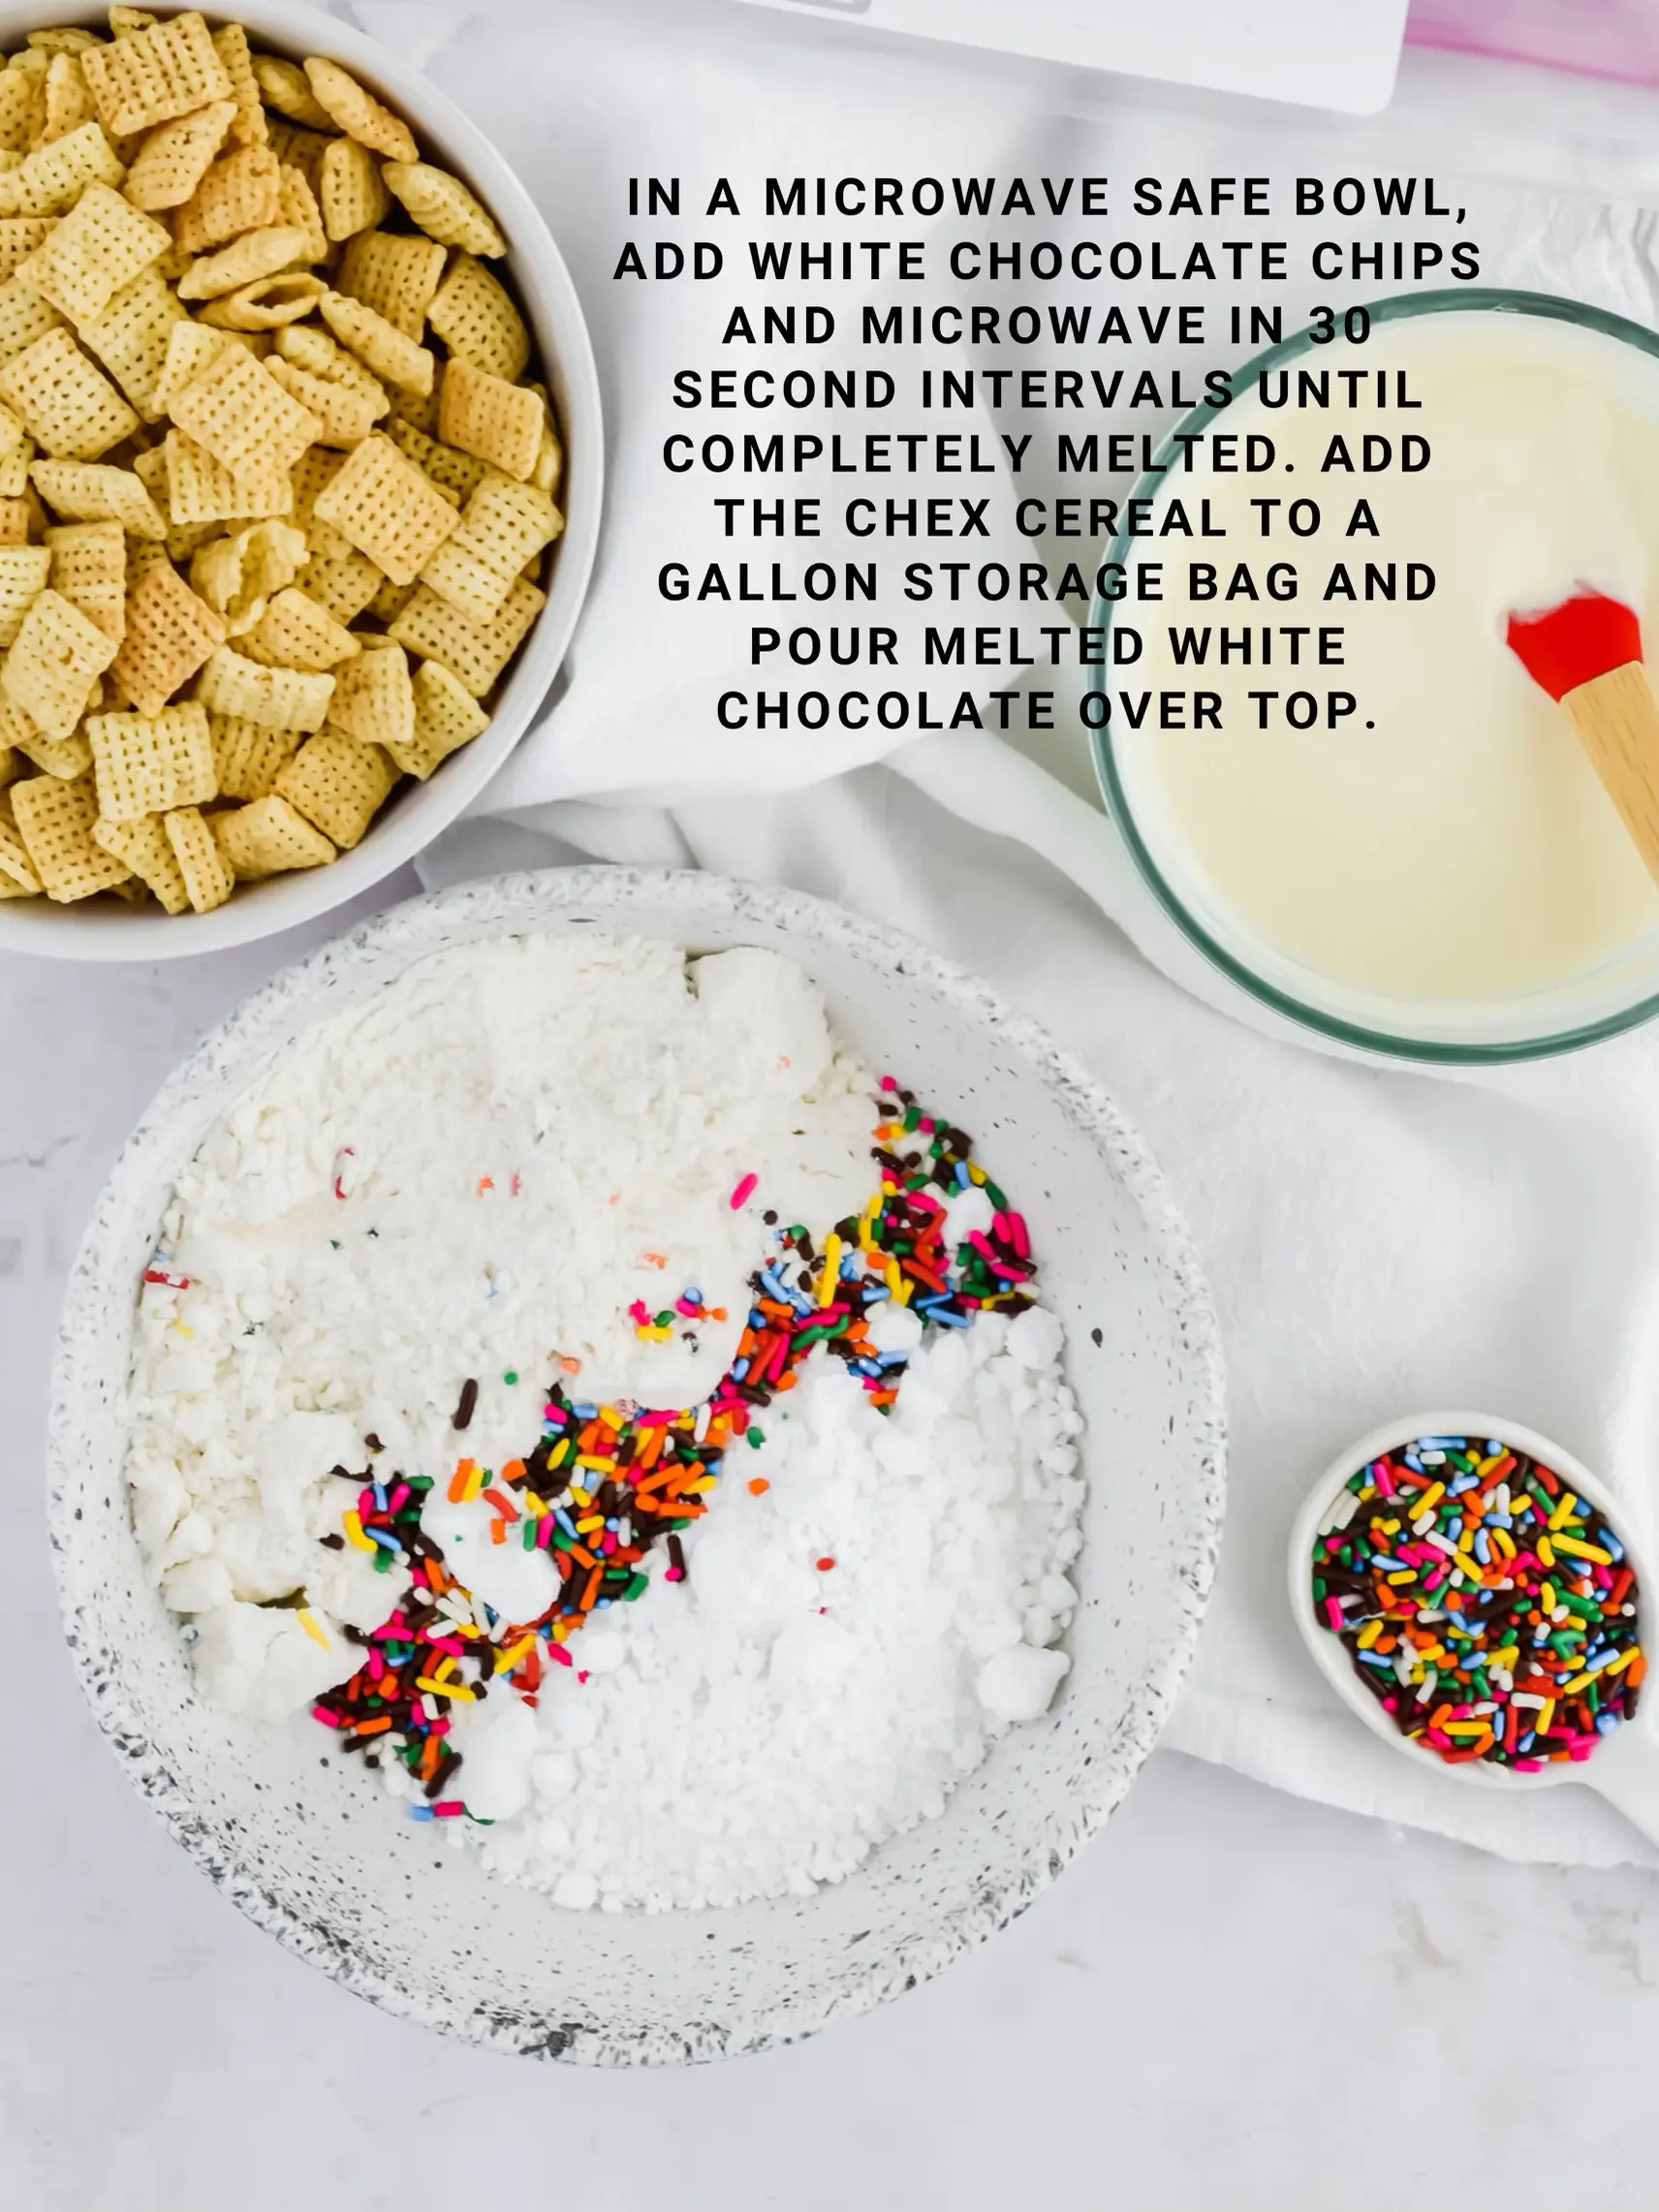  A bowl of cereal with white chocolate chips and a gallon storage bag of melted white chocolate.